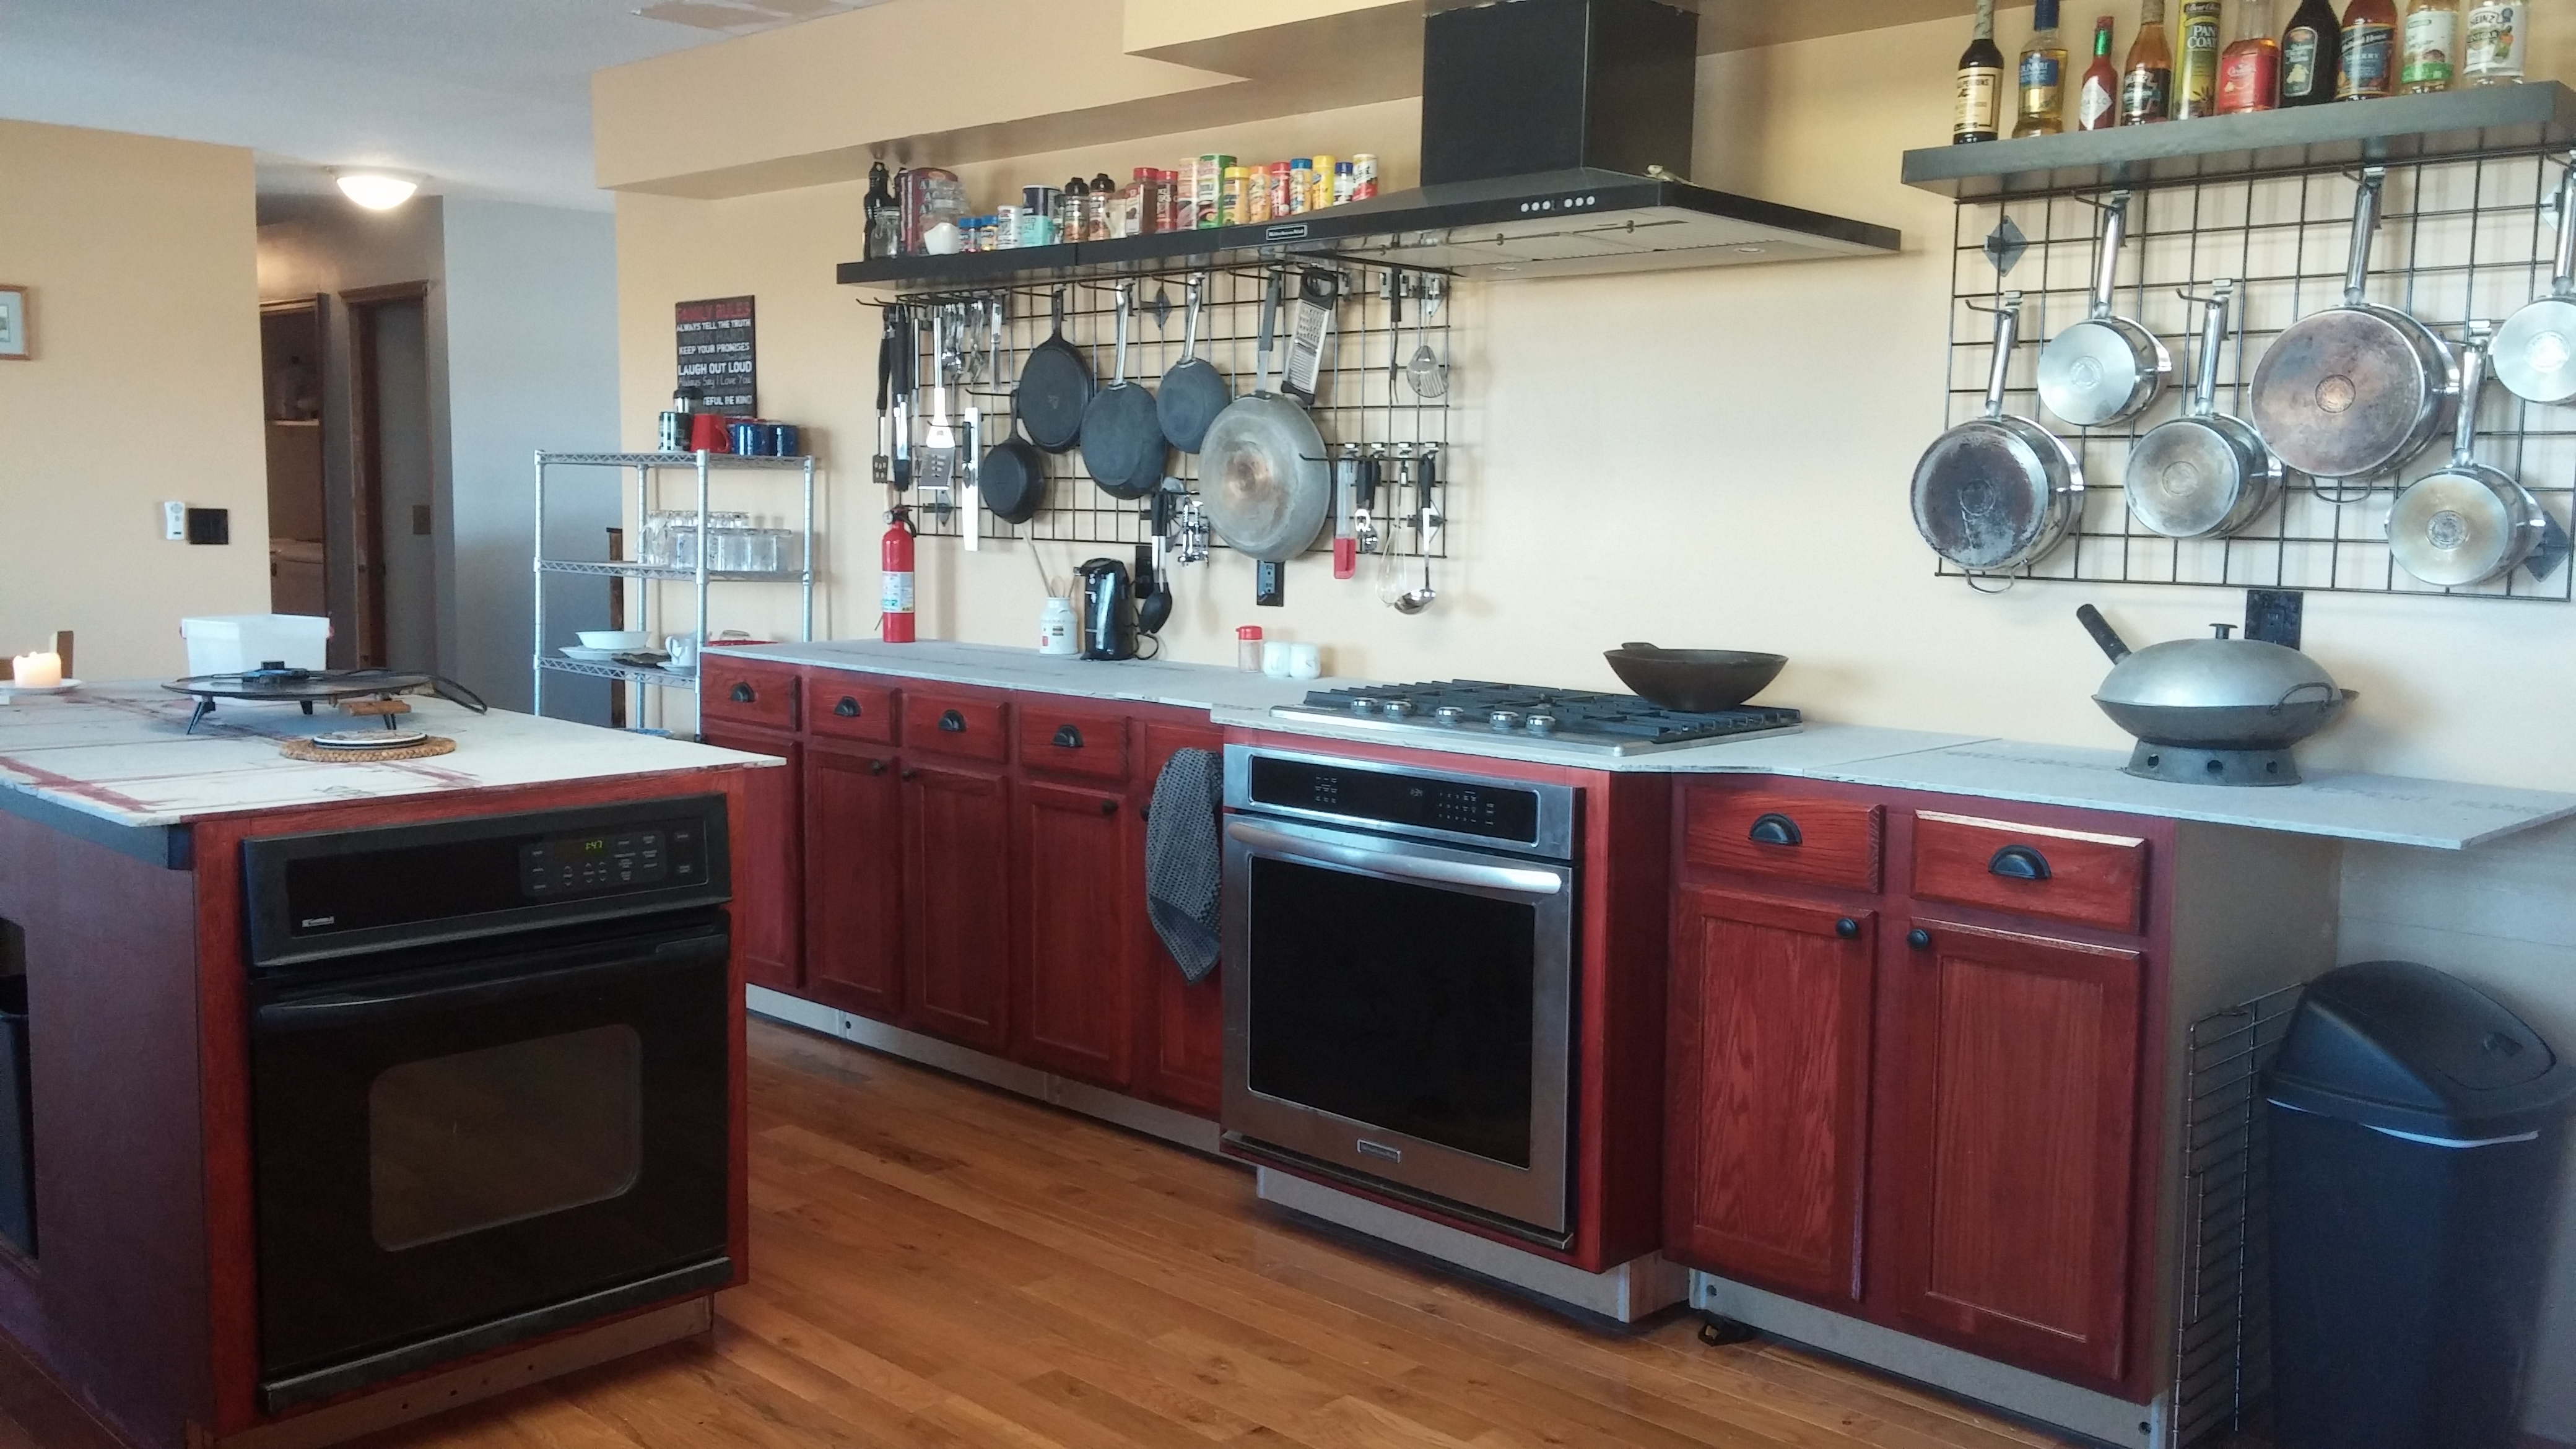 Yes, Two ovens, a convection oven and a regular oven.  Gas stove top and a venthood that goes all the way outside.